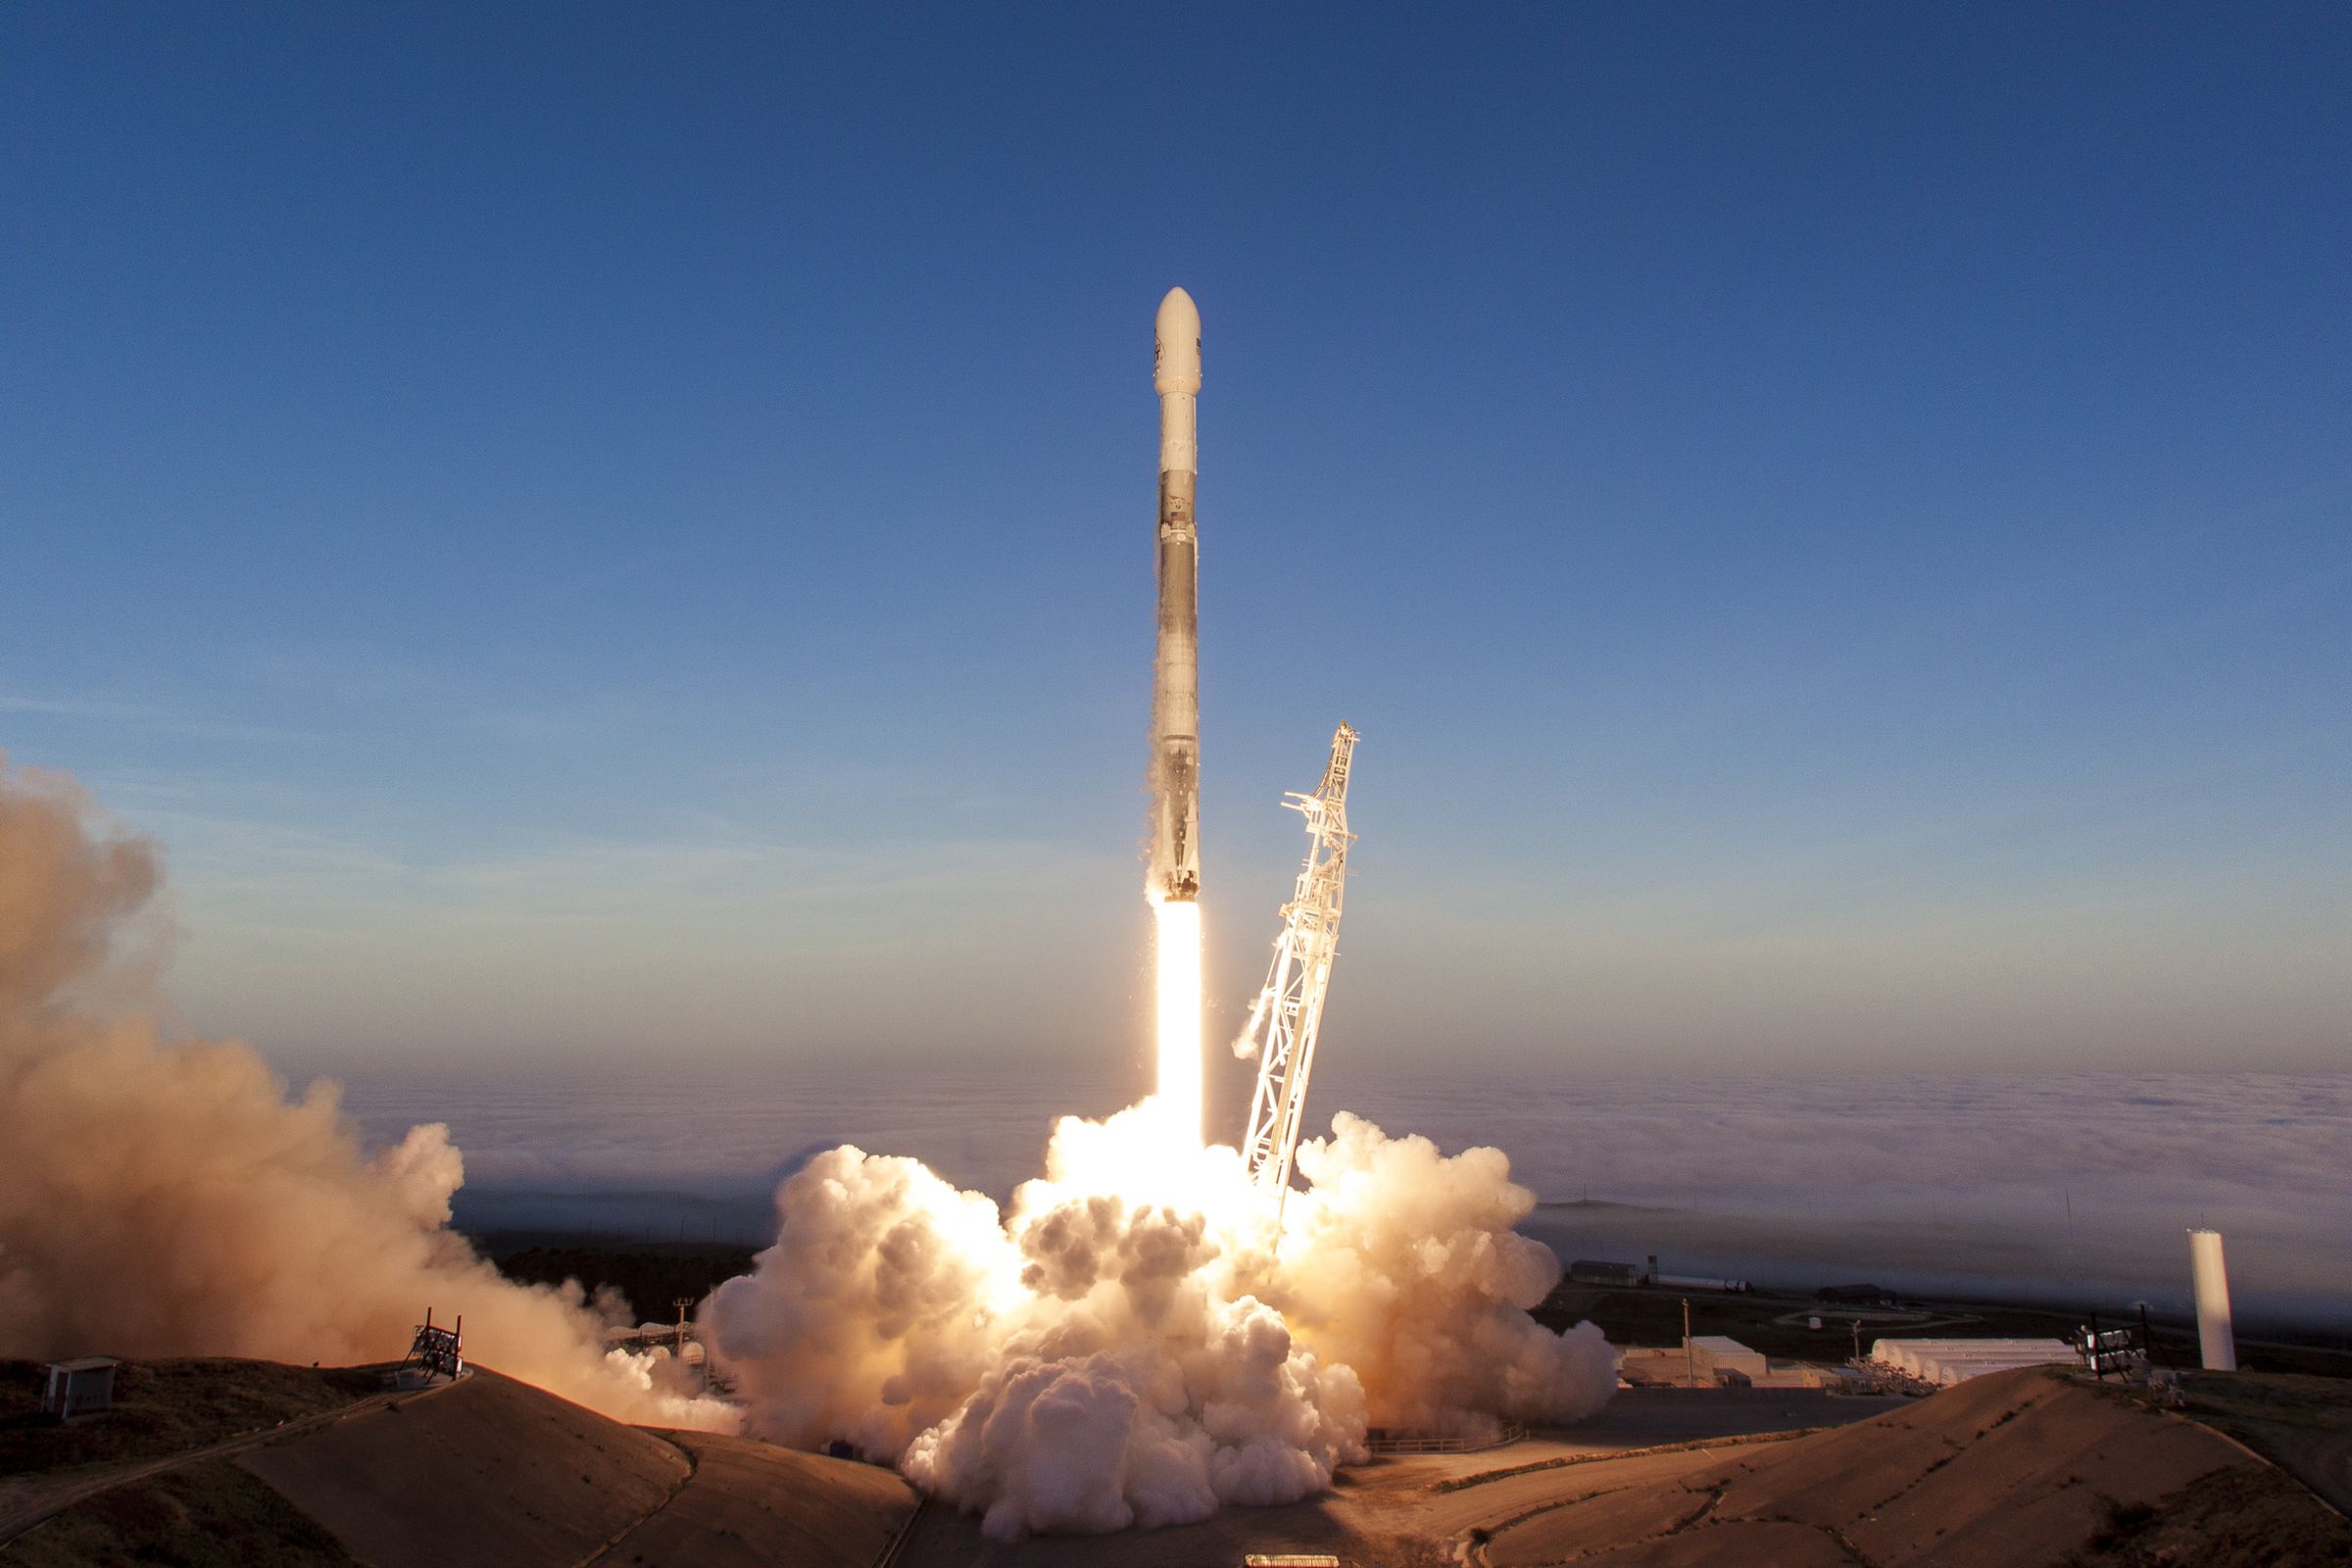 A SpaceX Falcon 9 rocket taking off from Vandenberg Air Force Base